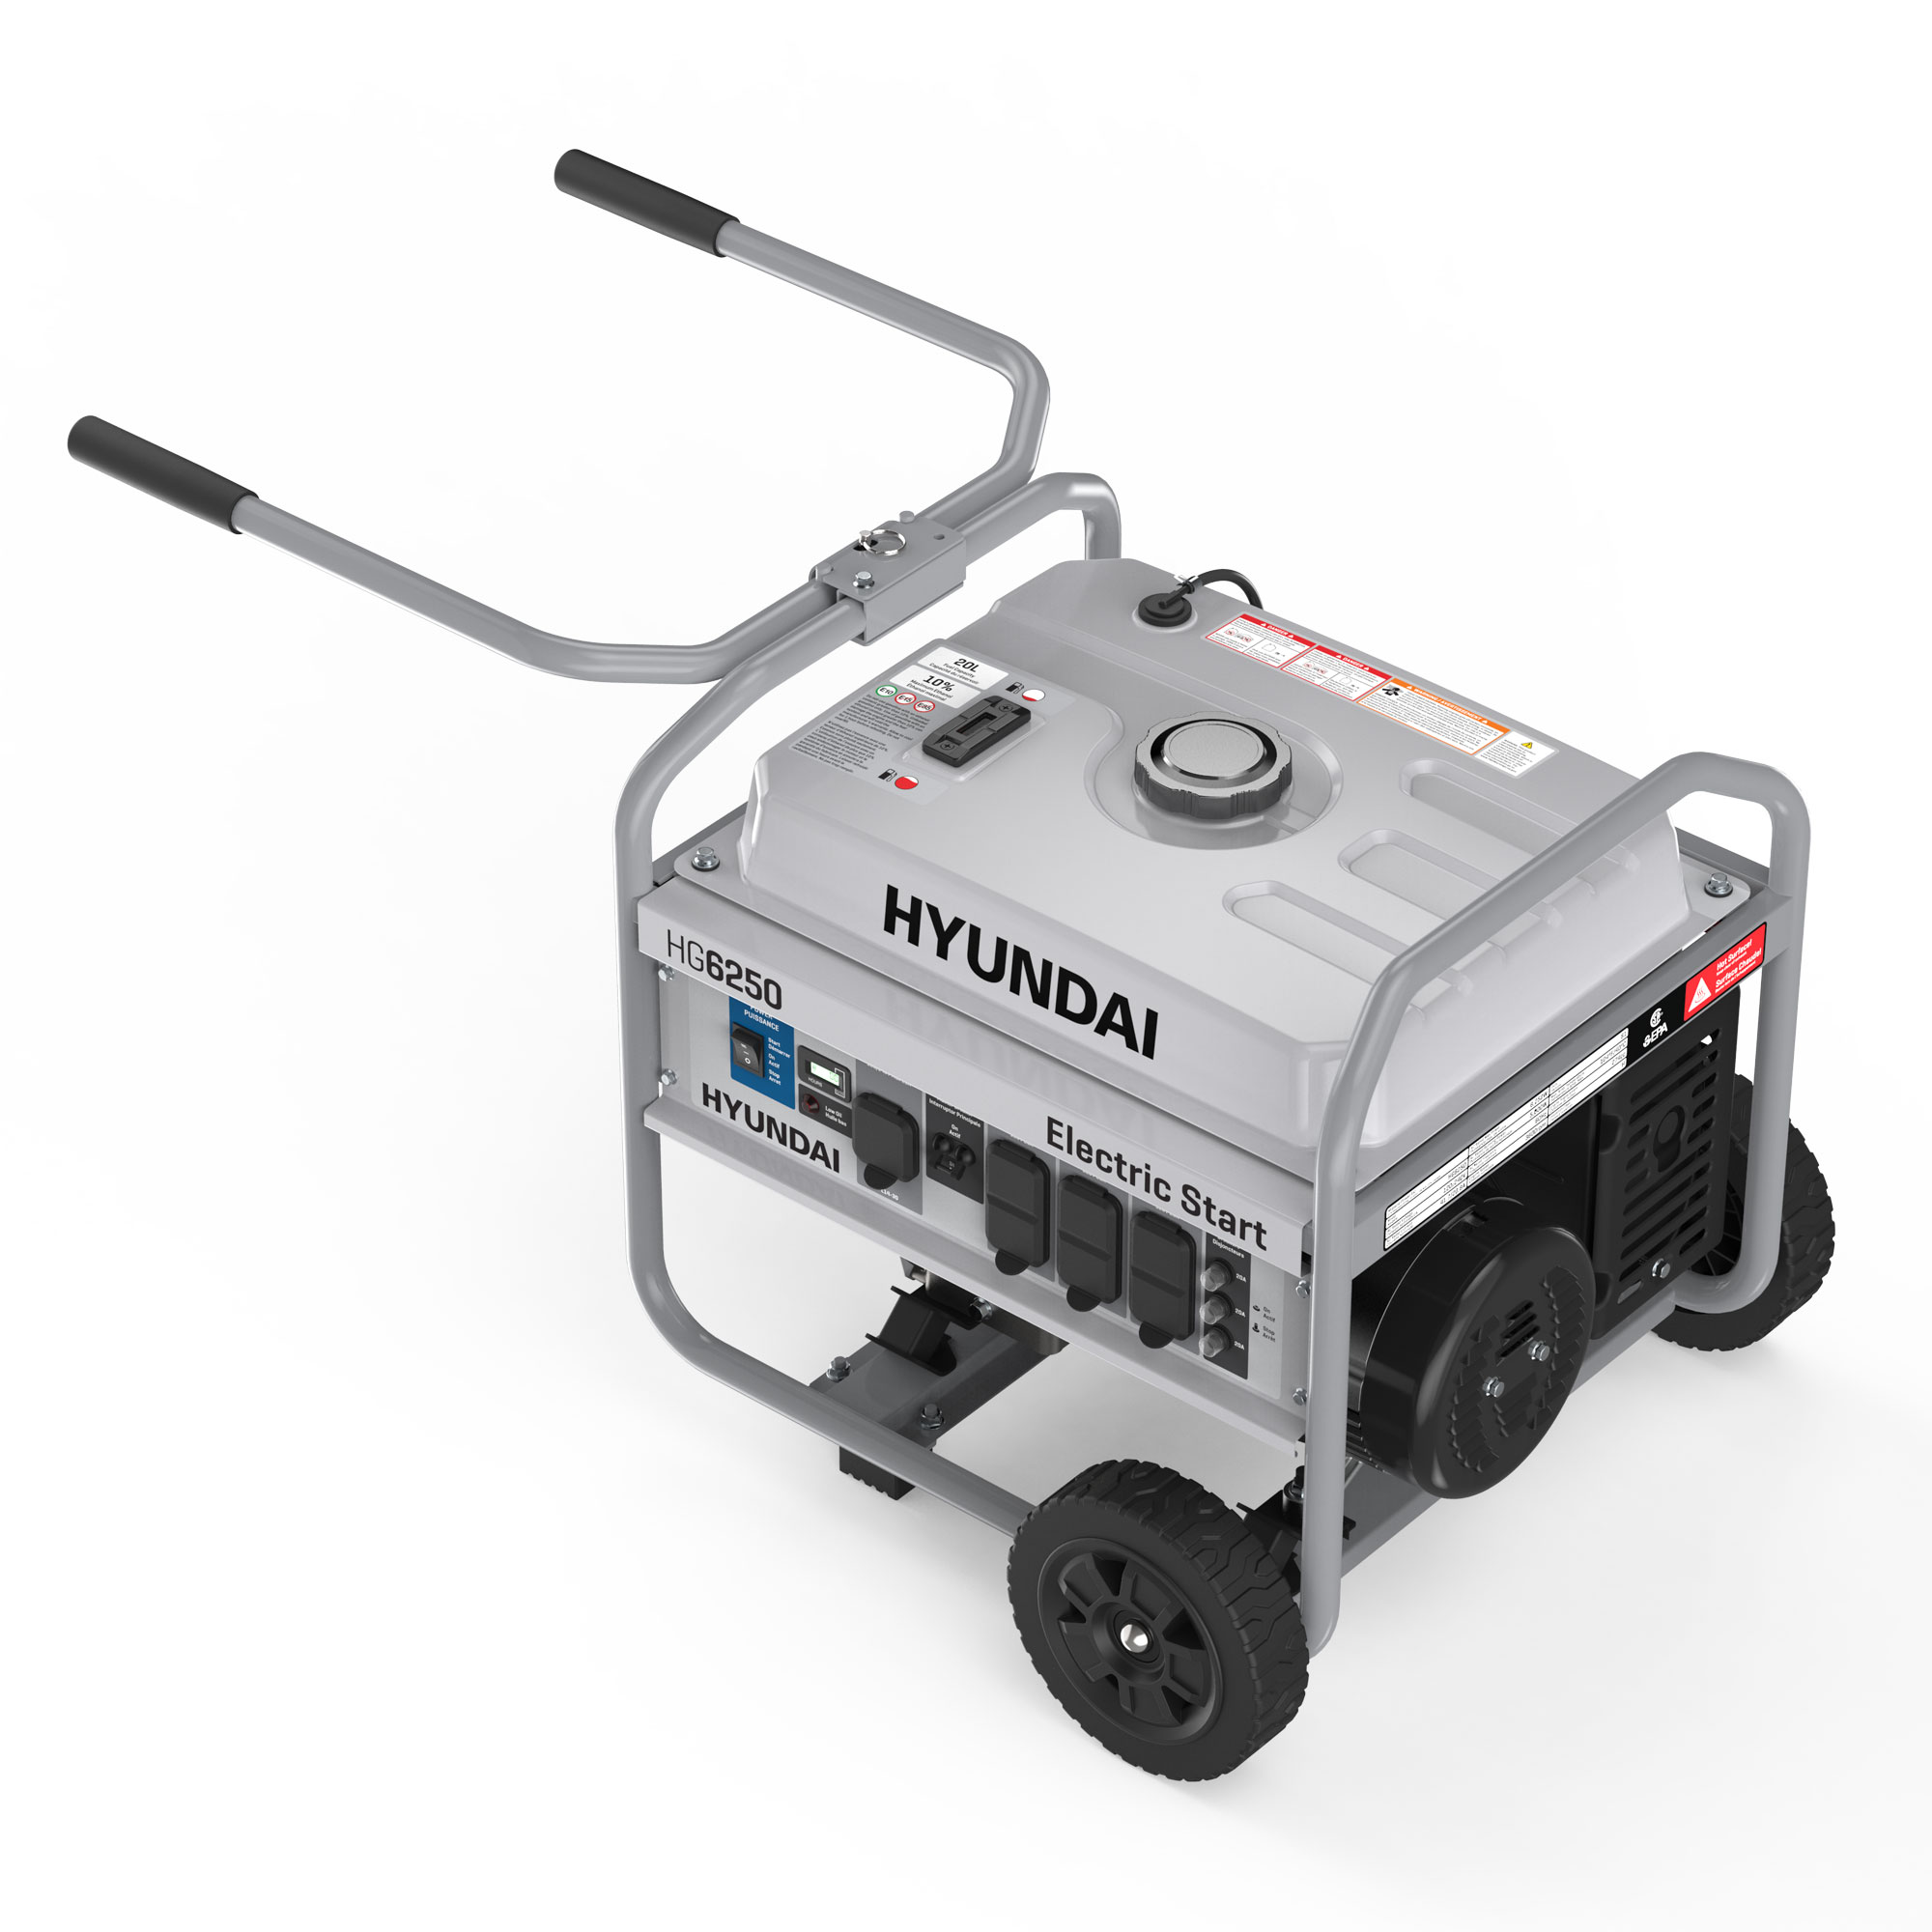 HG6250   Hyundai Conventional Generator 120/240V 5000/6250W with Electric Start